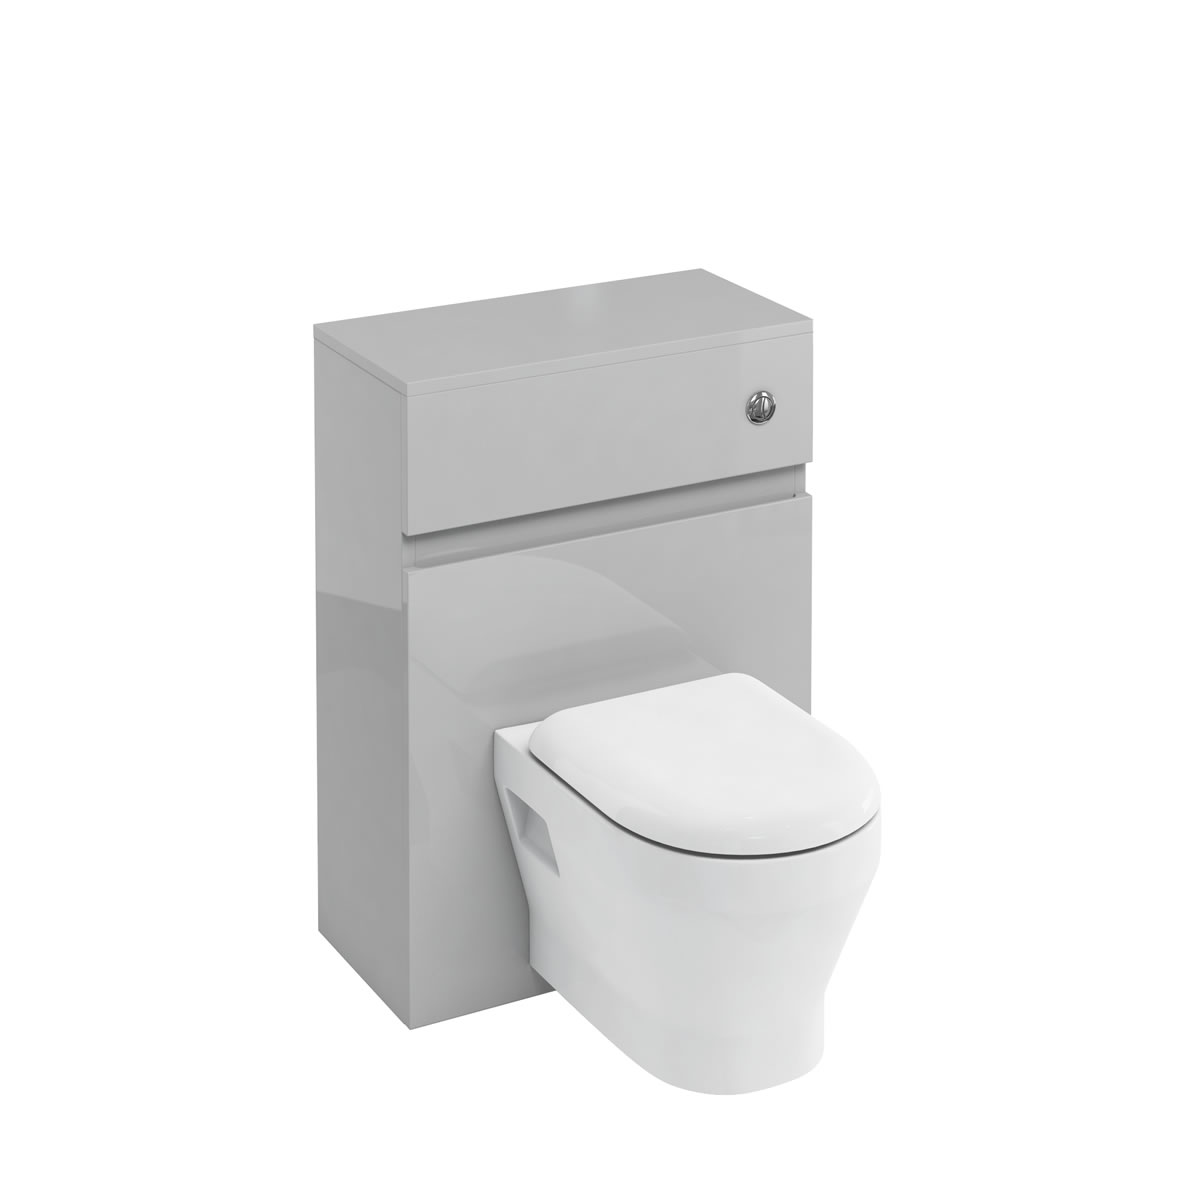 D30 wall hung WC unit with push button - light grey